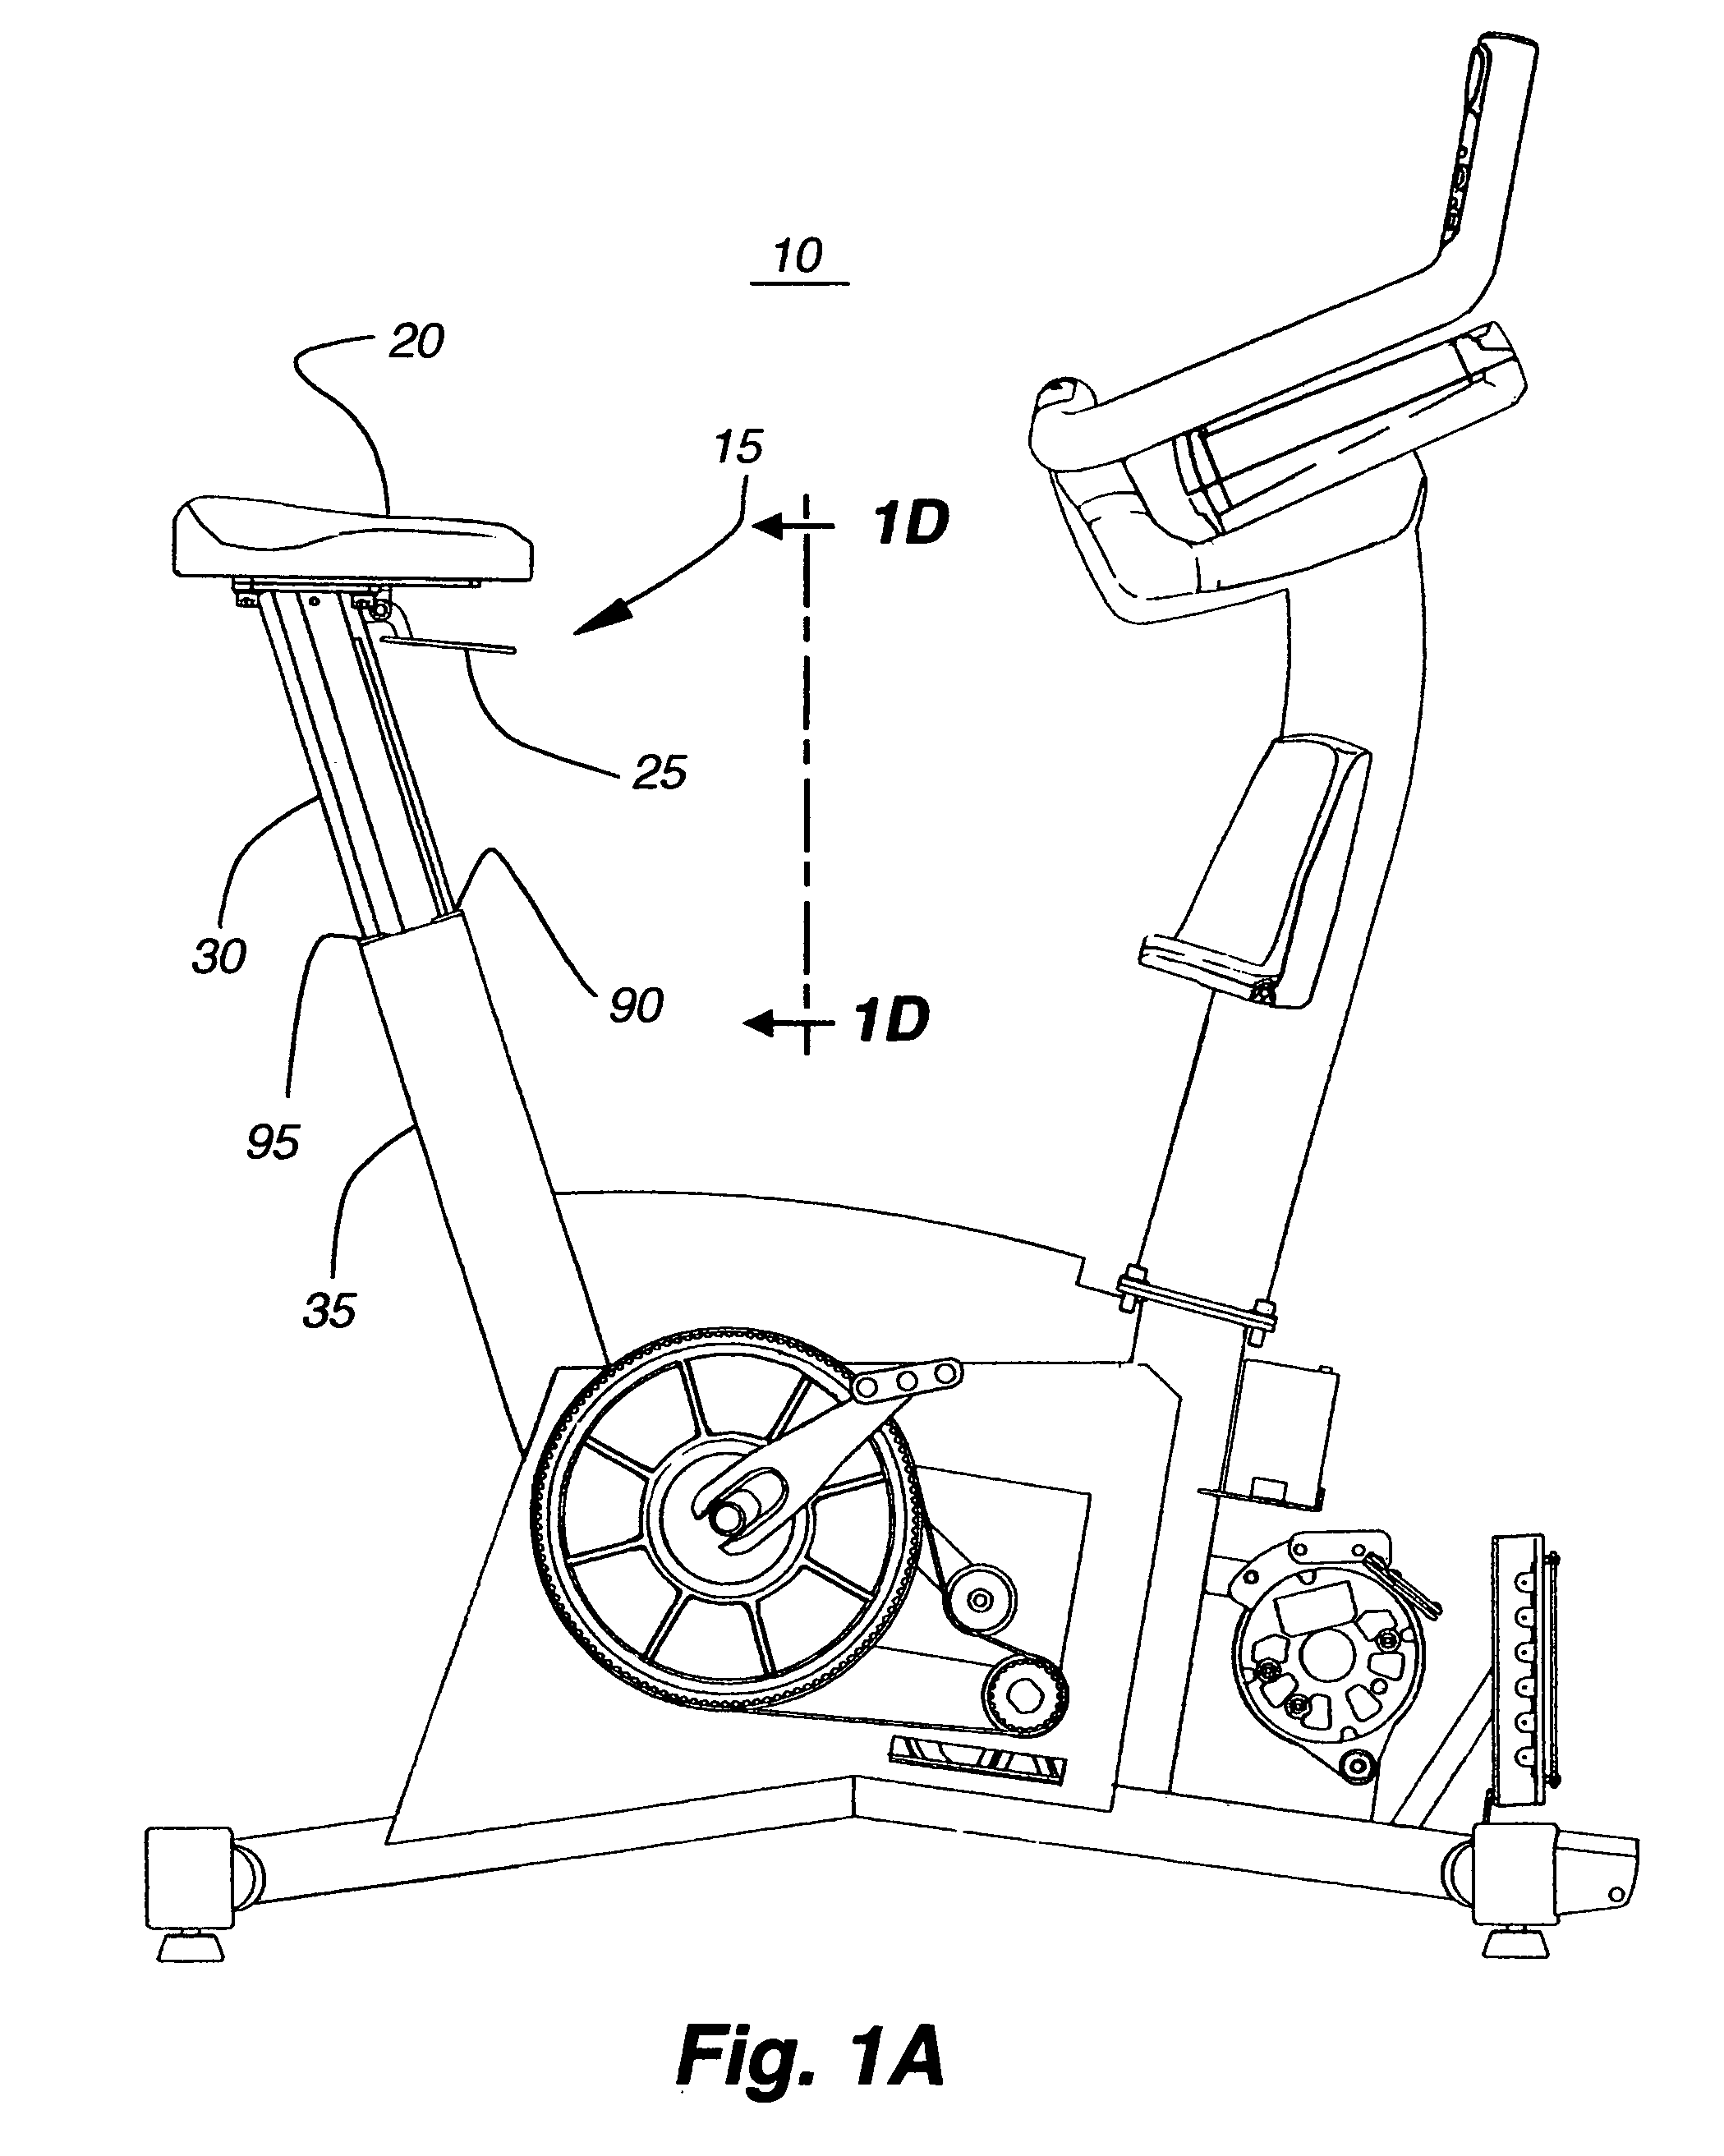 Mechanism and method for adjusting seat height for exercise equipment